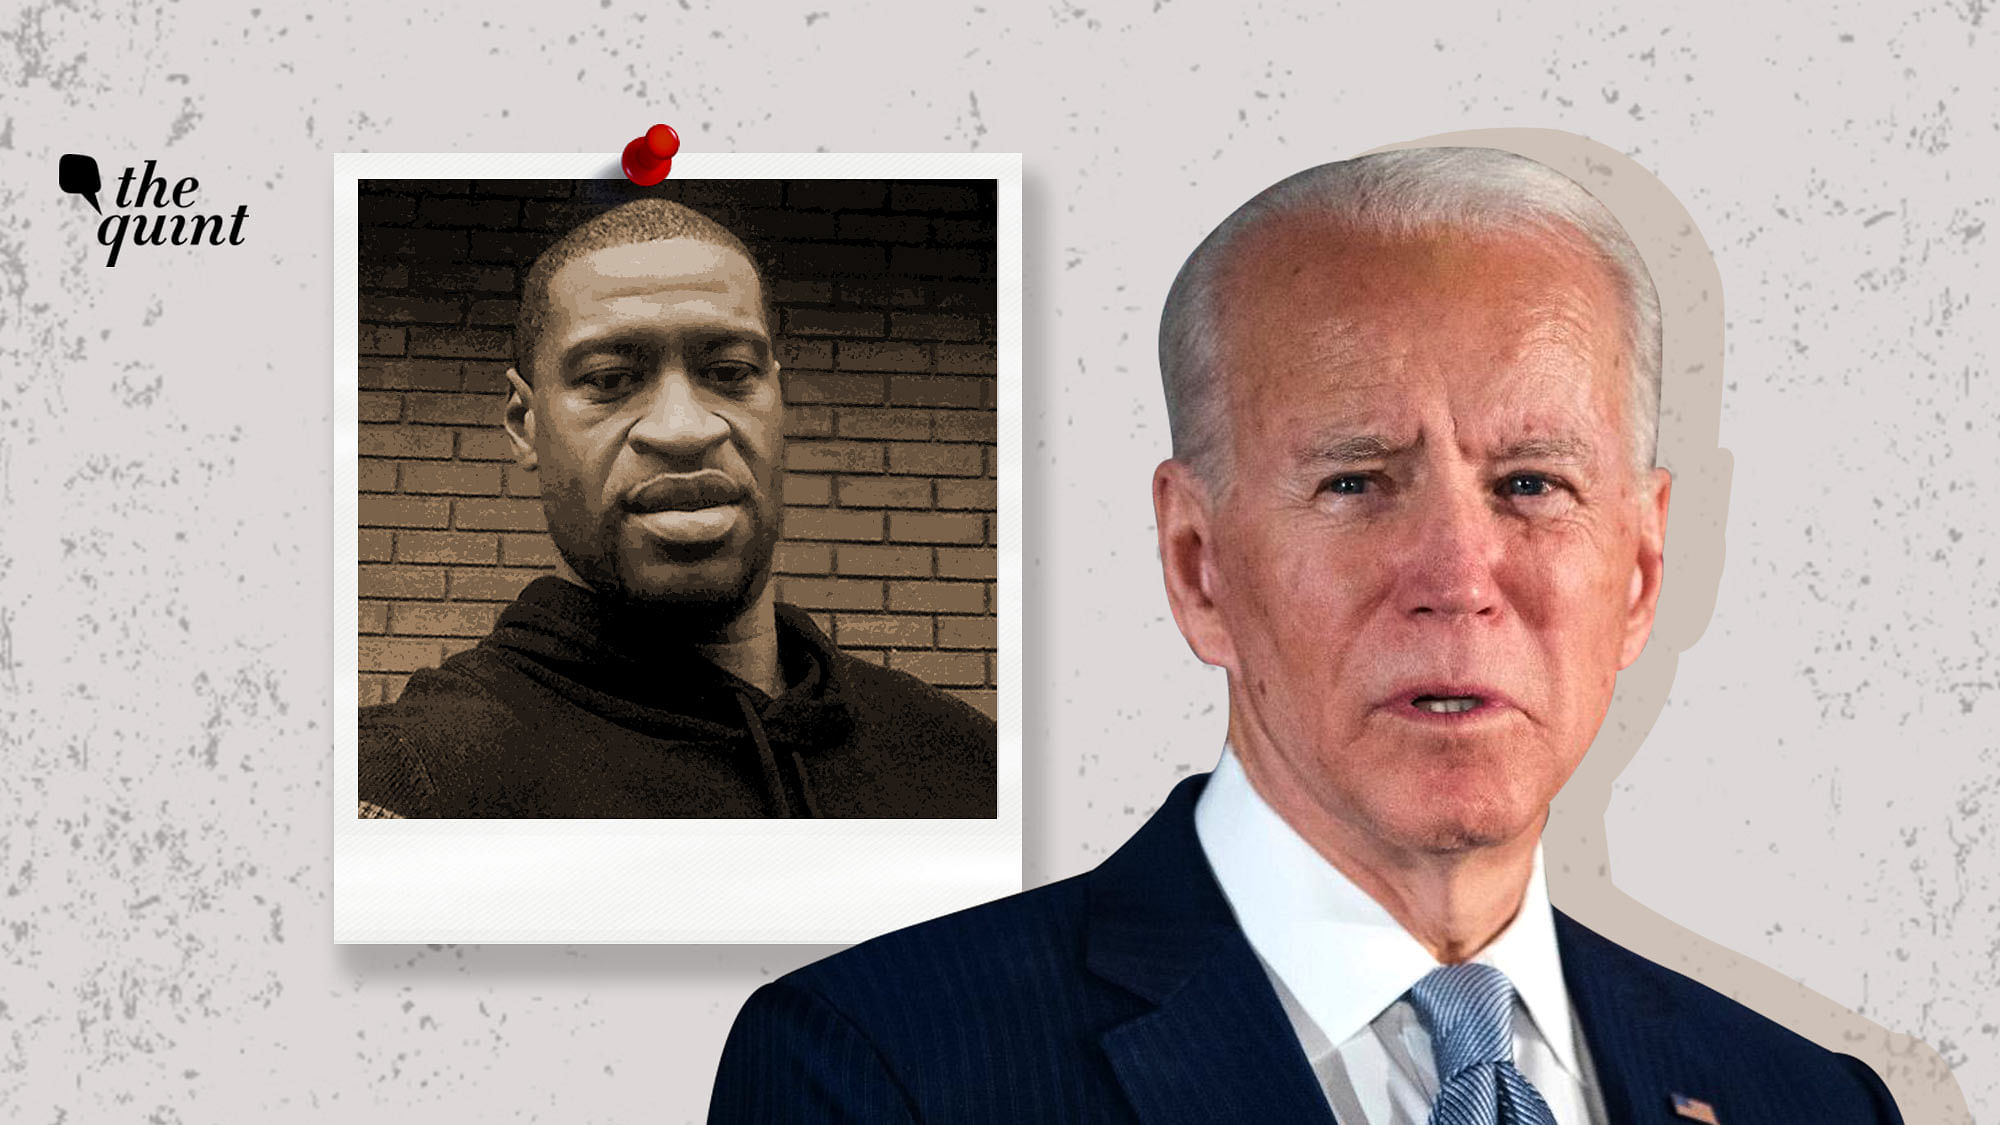 Biden said that Floyd’s daughter shouldn’t have to ask the questions that too many black children have to ask for generations – “why is daddy gone?”